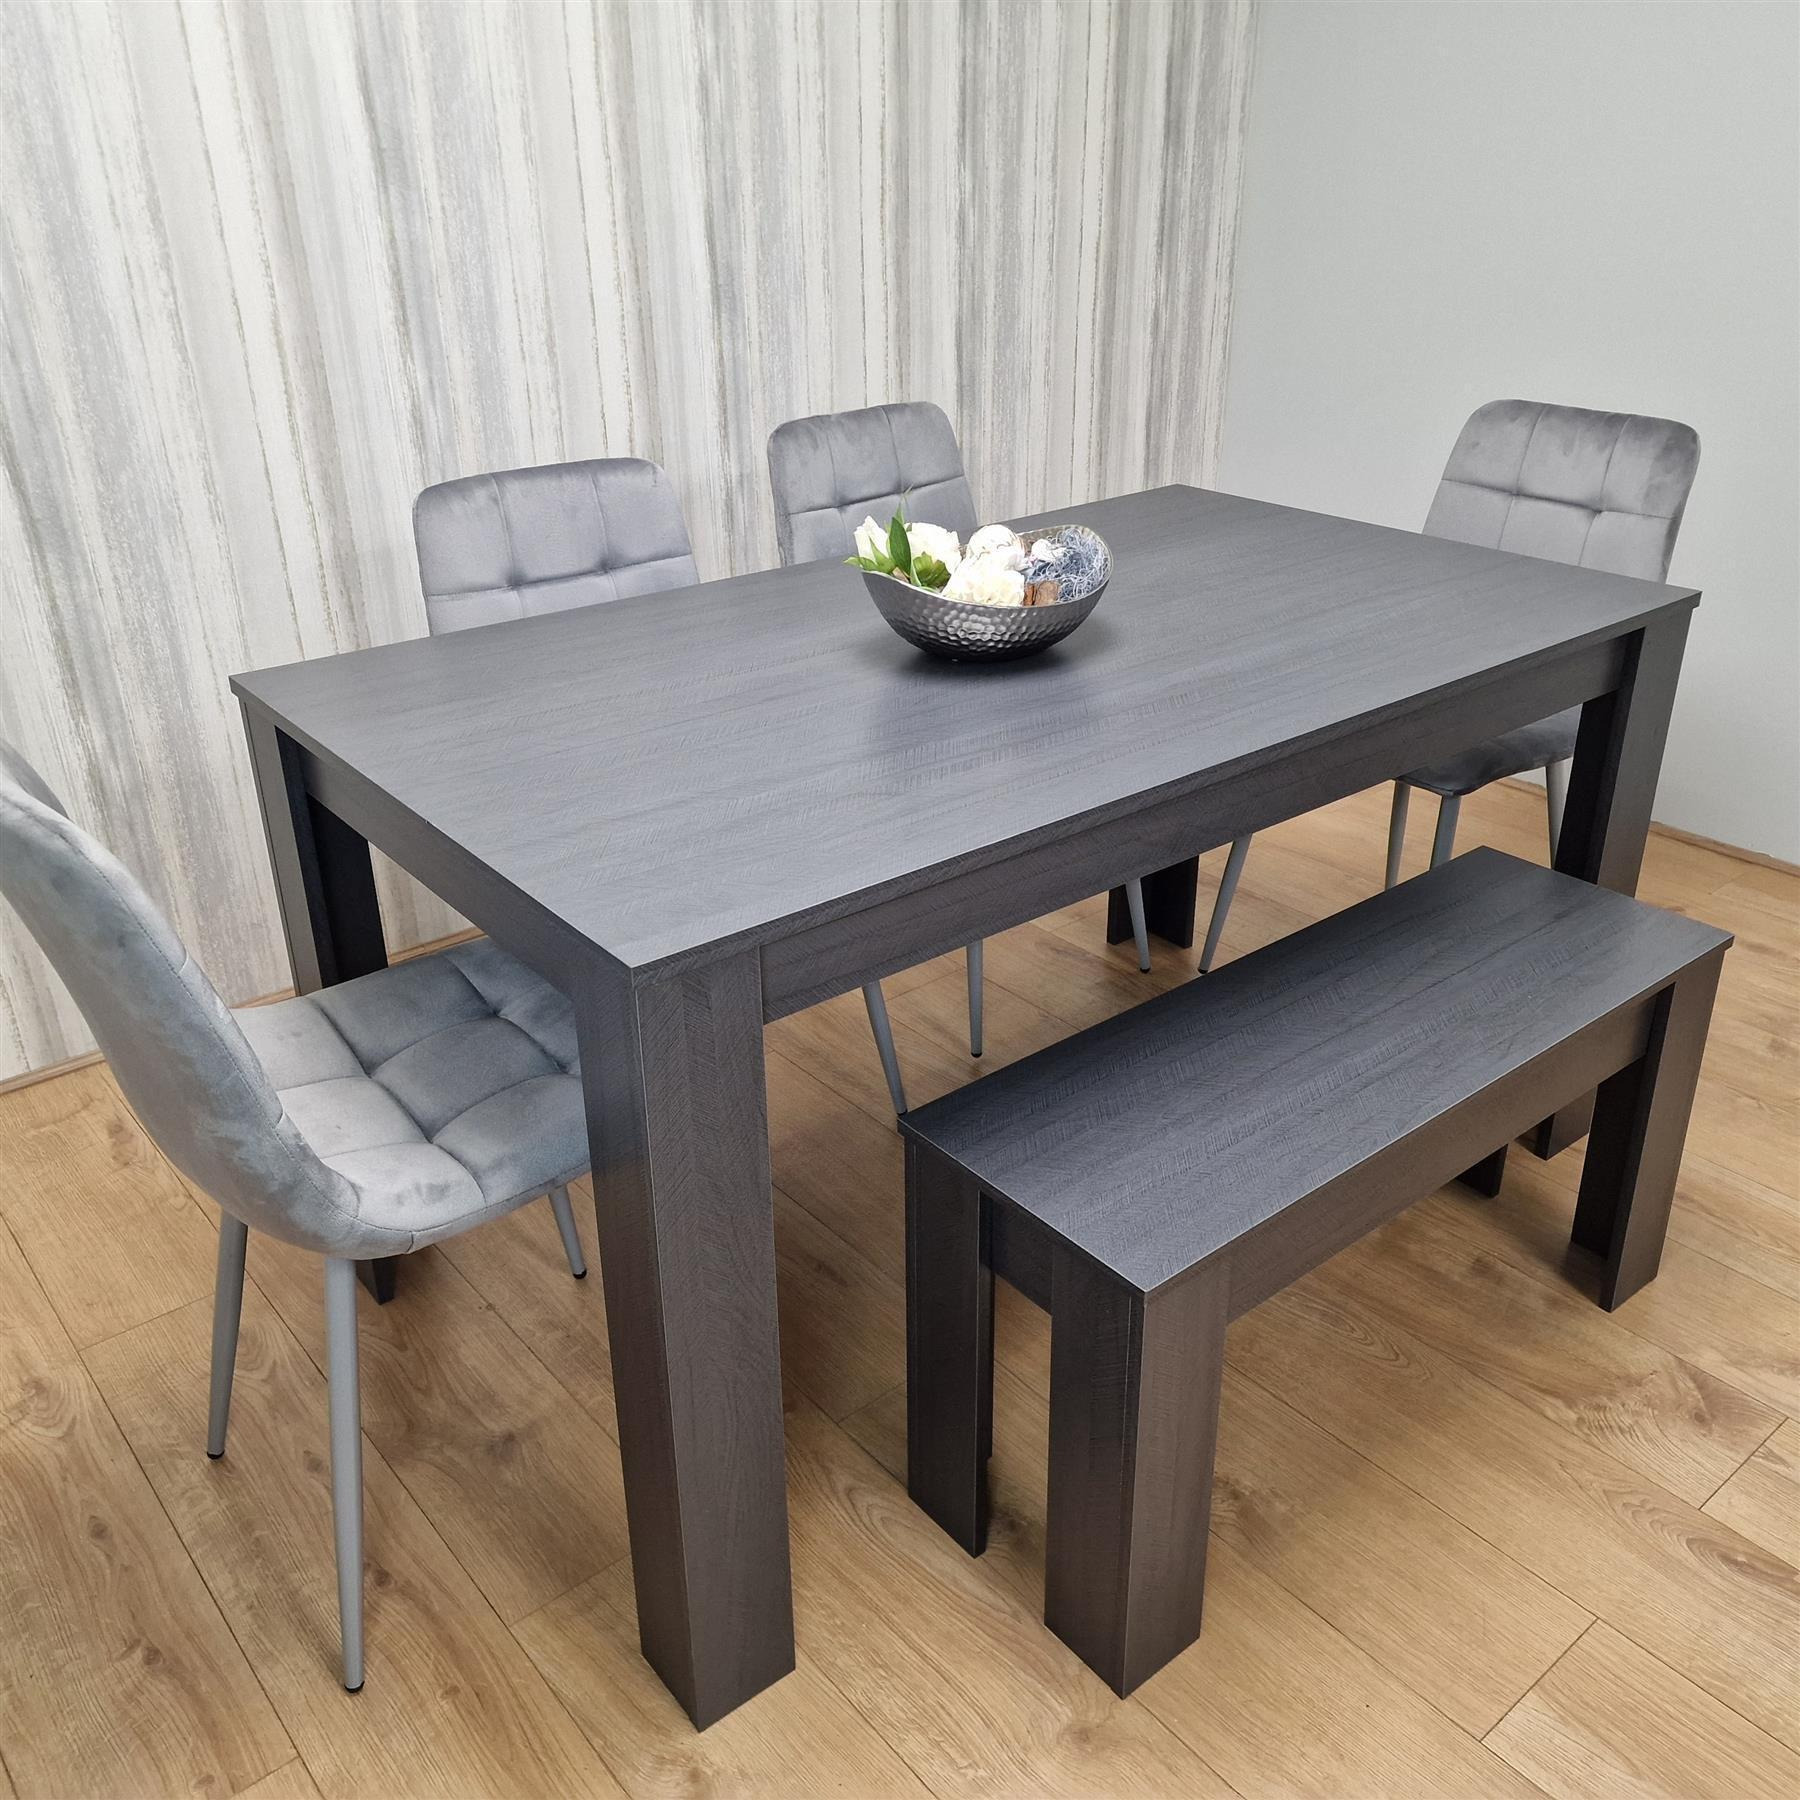 Dining Table Set with 4 Chairs Dining Room, Kitchen table set of 4, and Bench - image 1